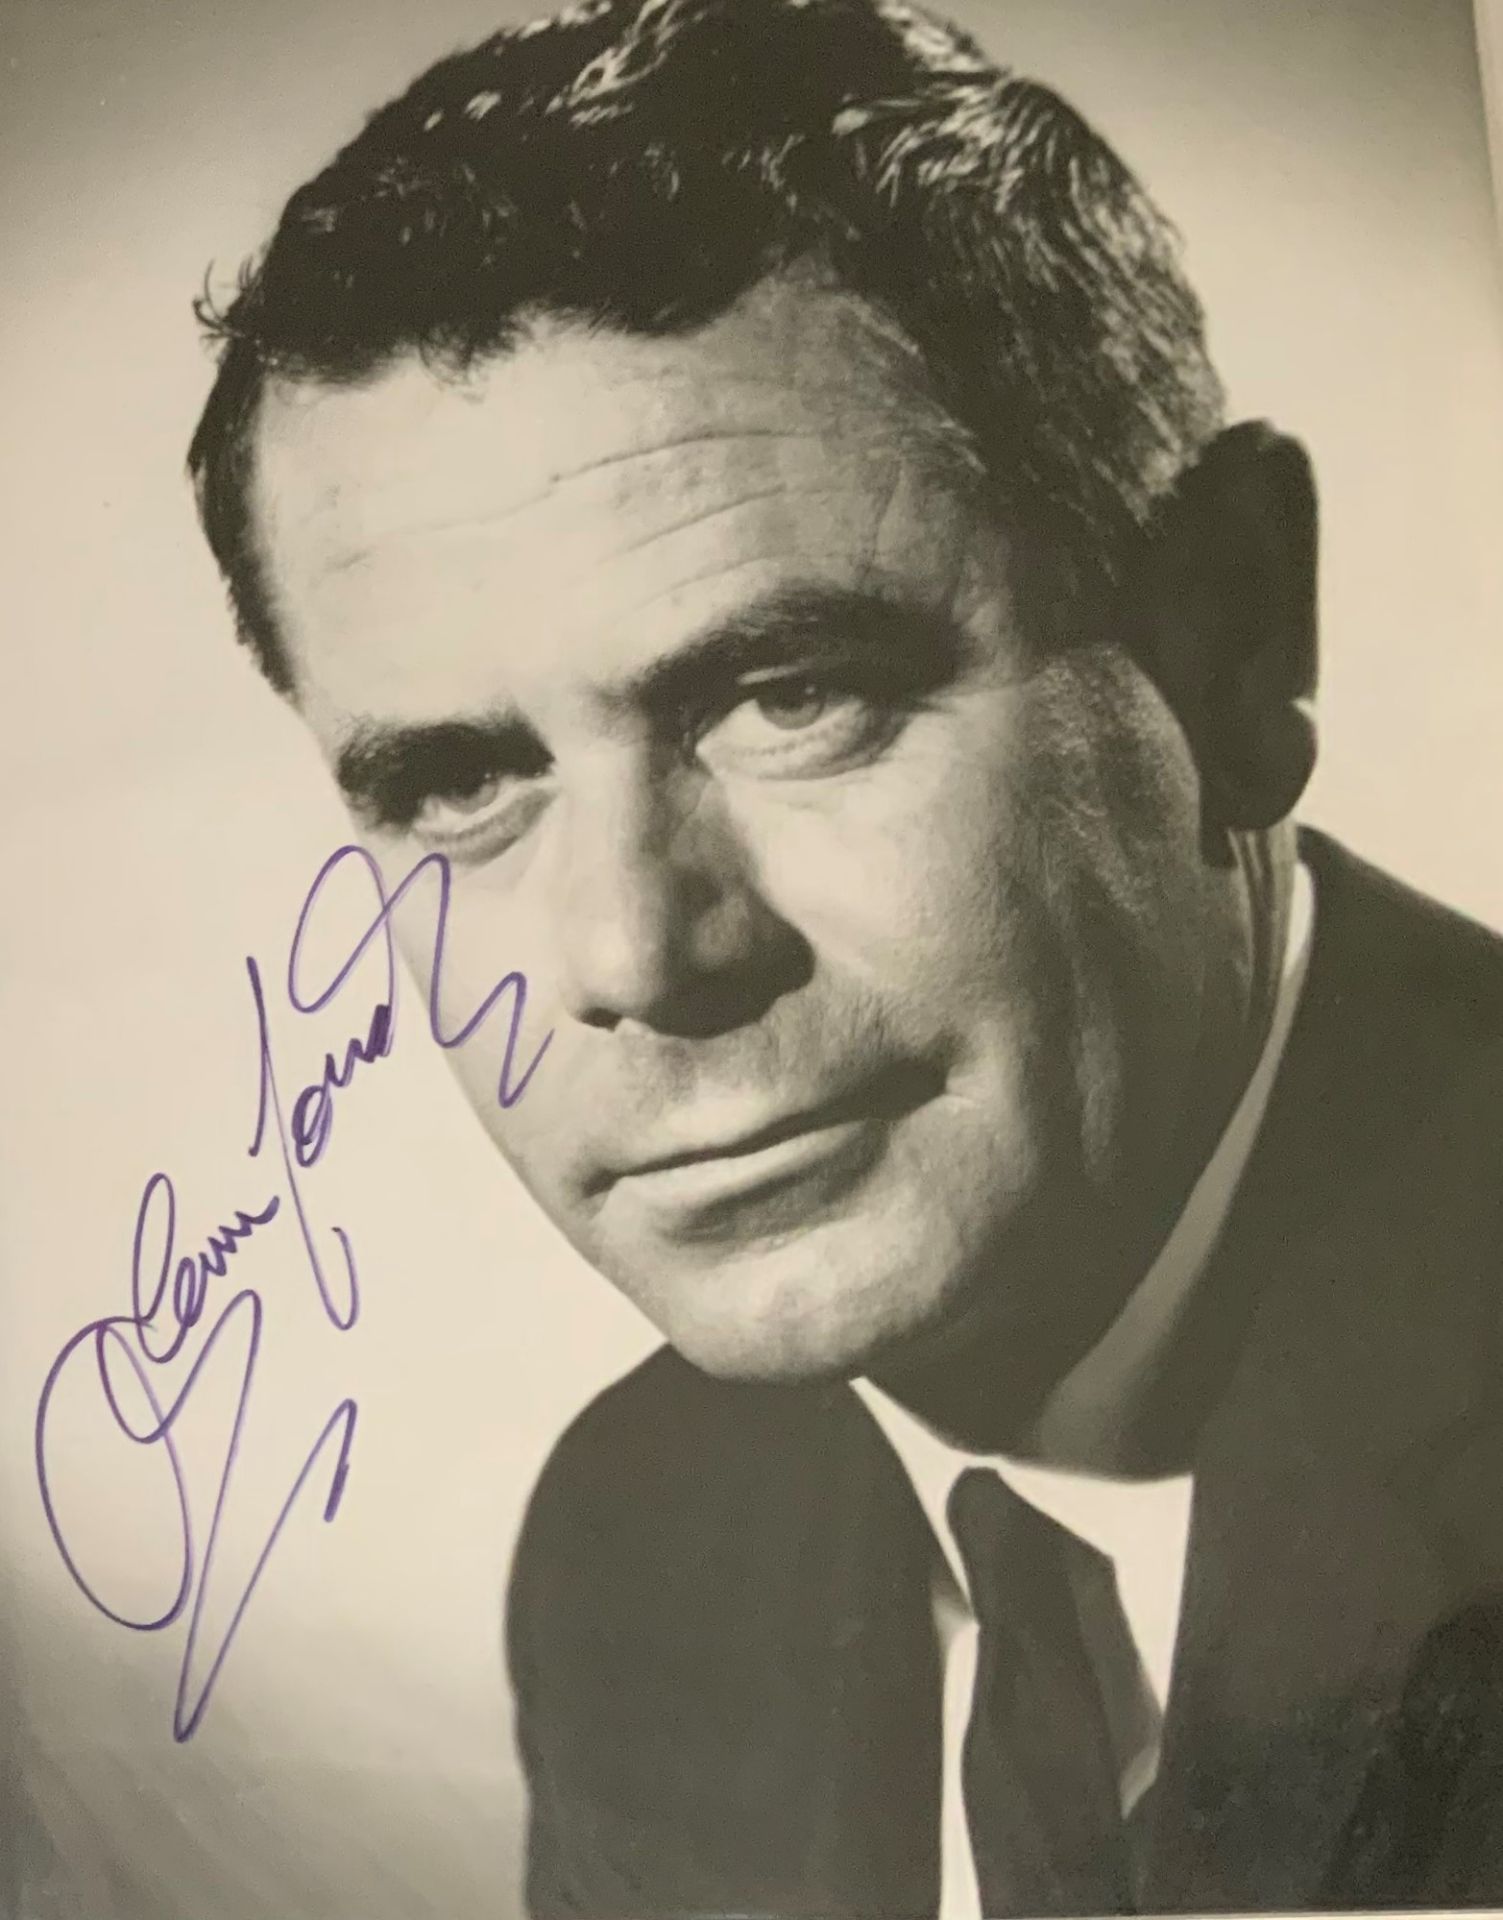 Glenn Ford Autograph - Image 2 of 2